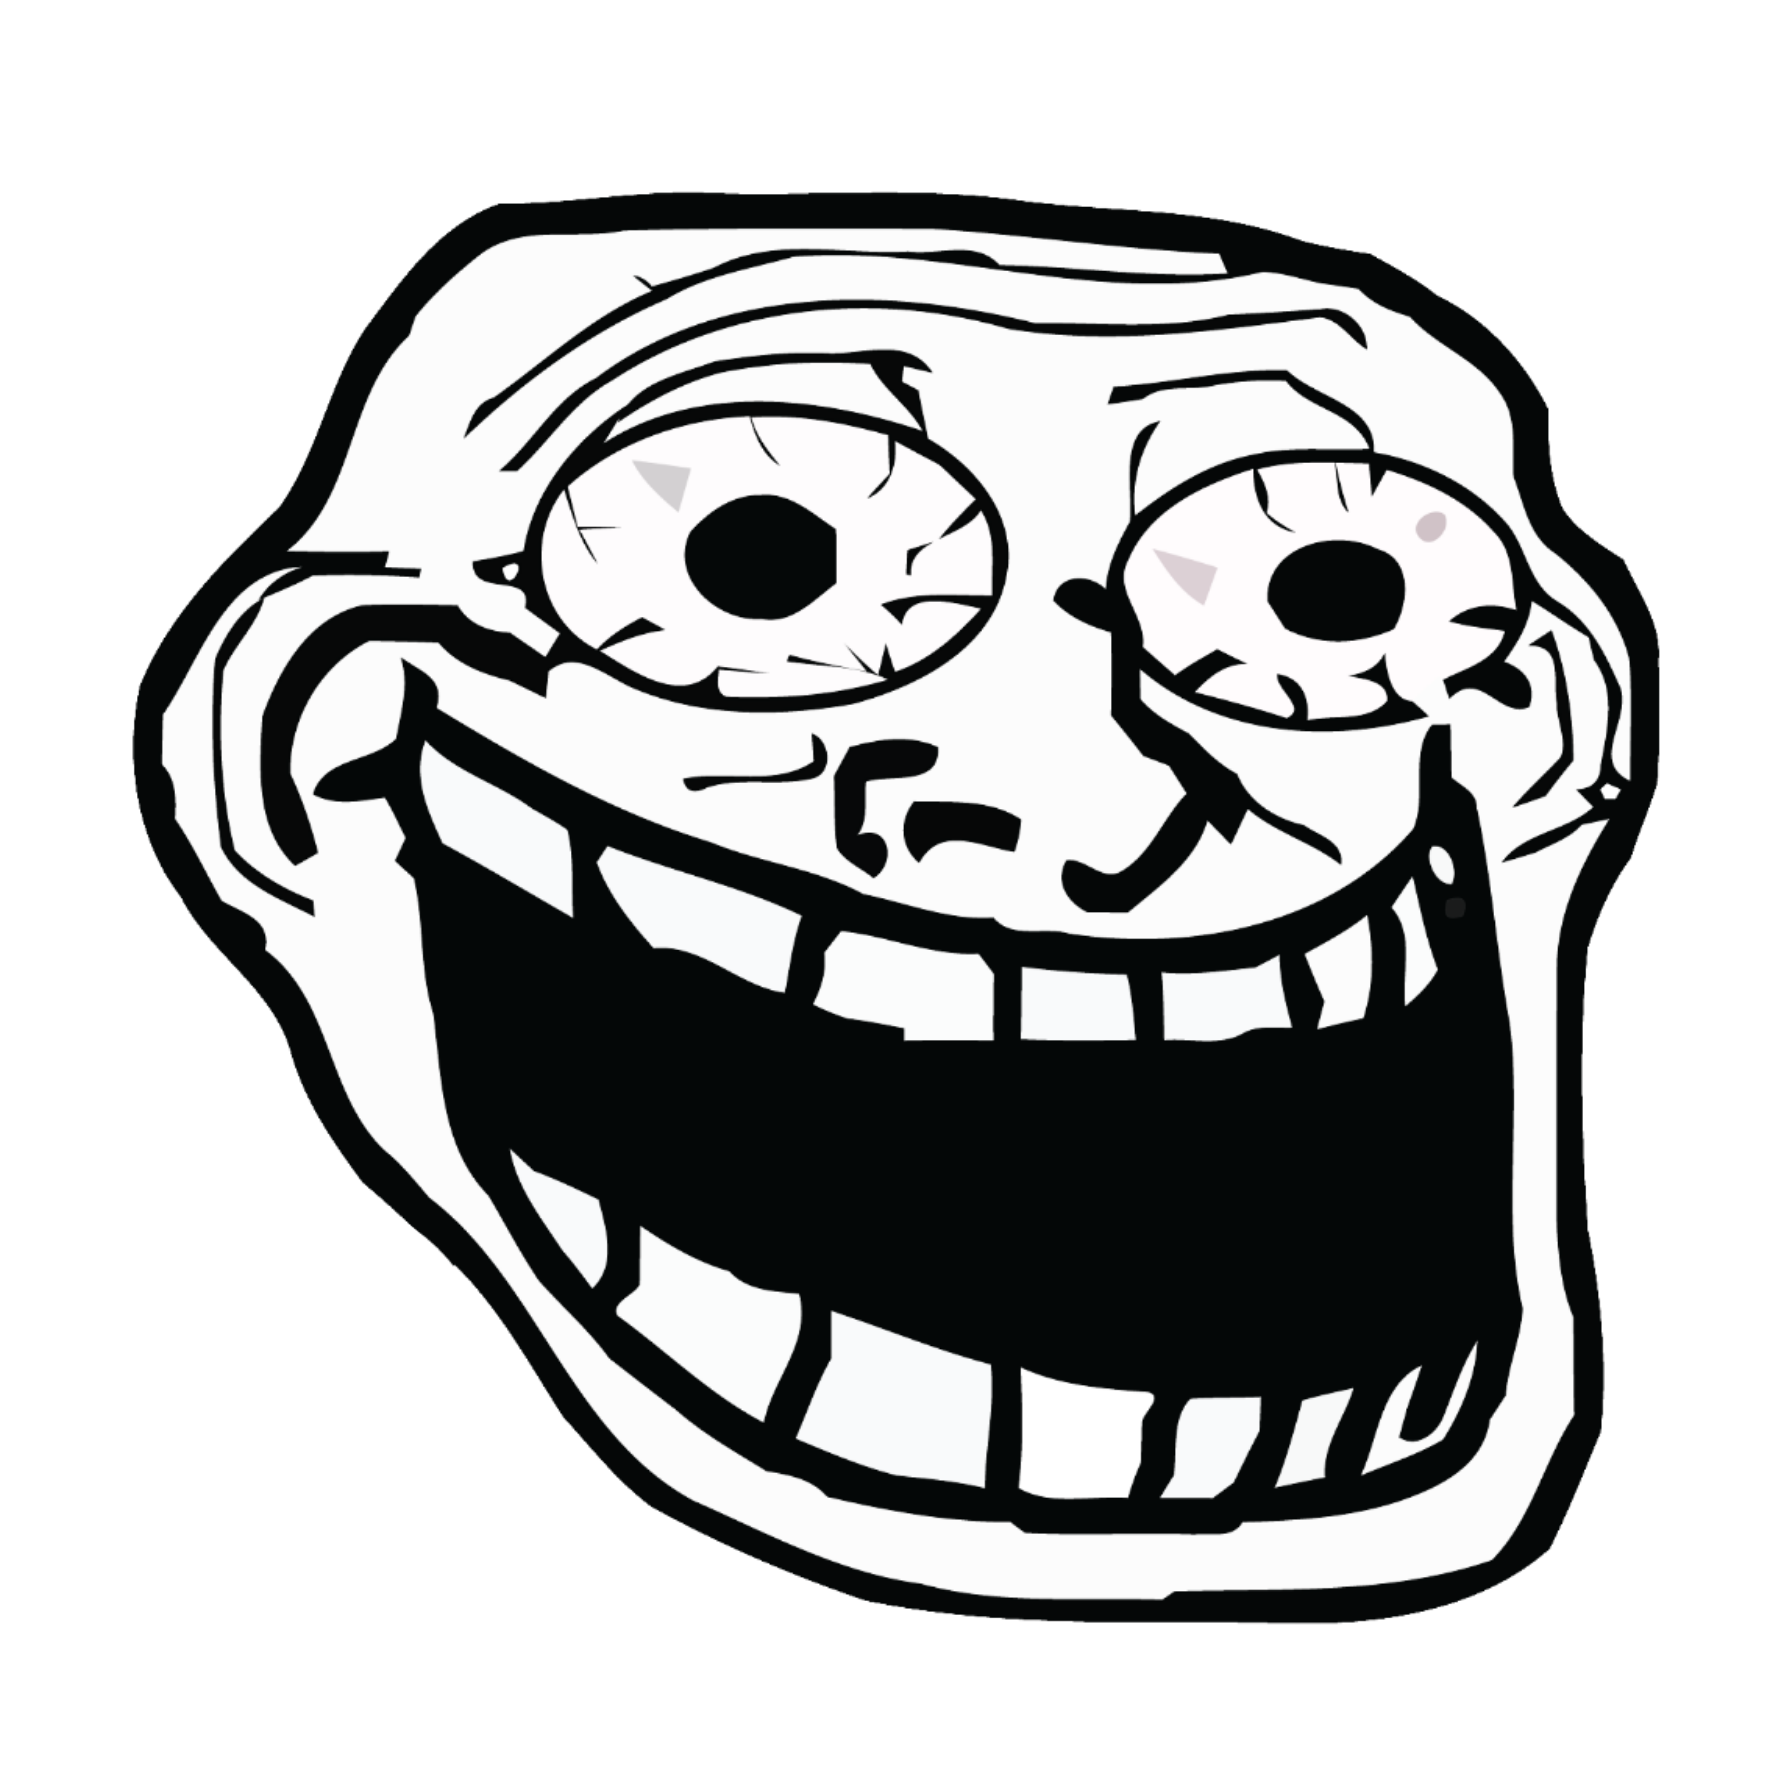 This visual is about trollface troll face meme memes freetoedit #trollface ...